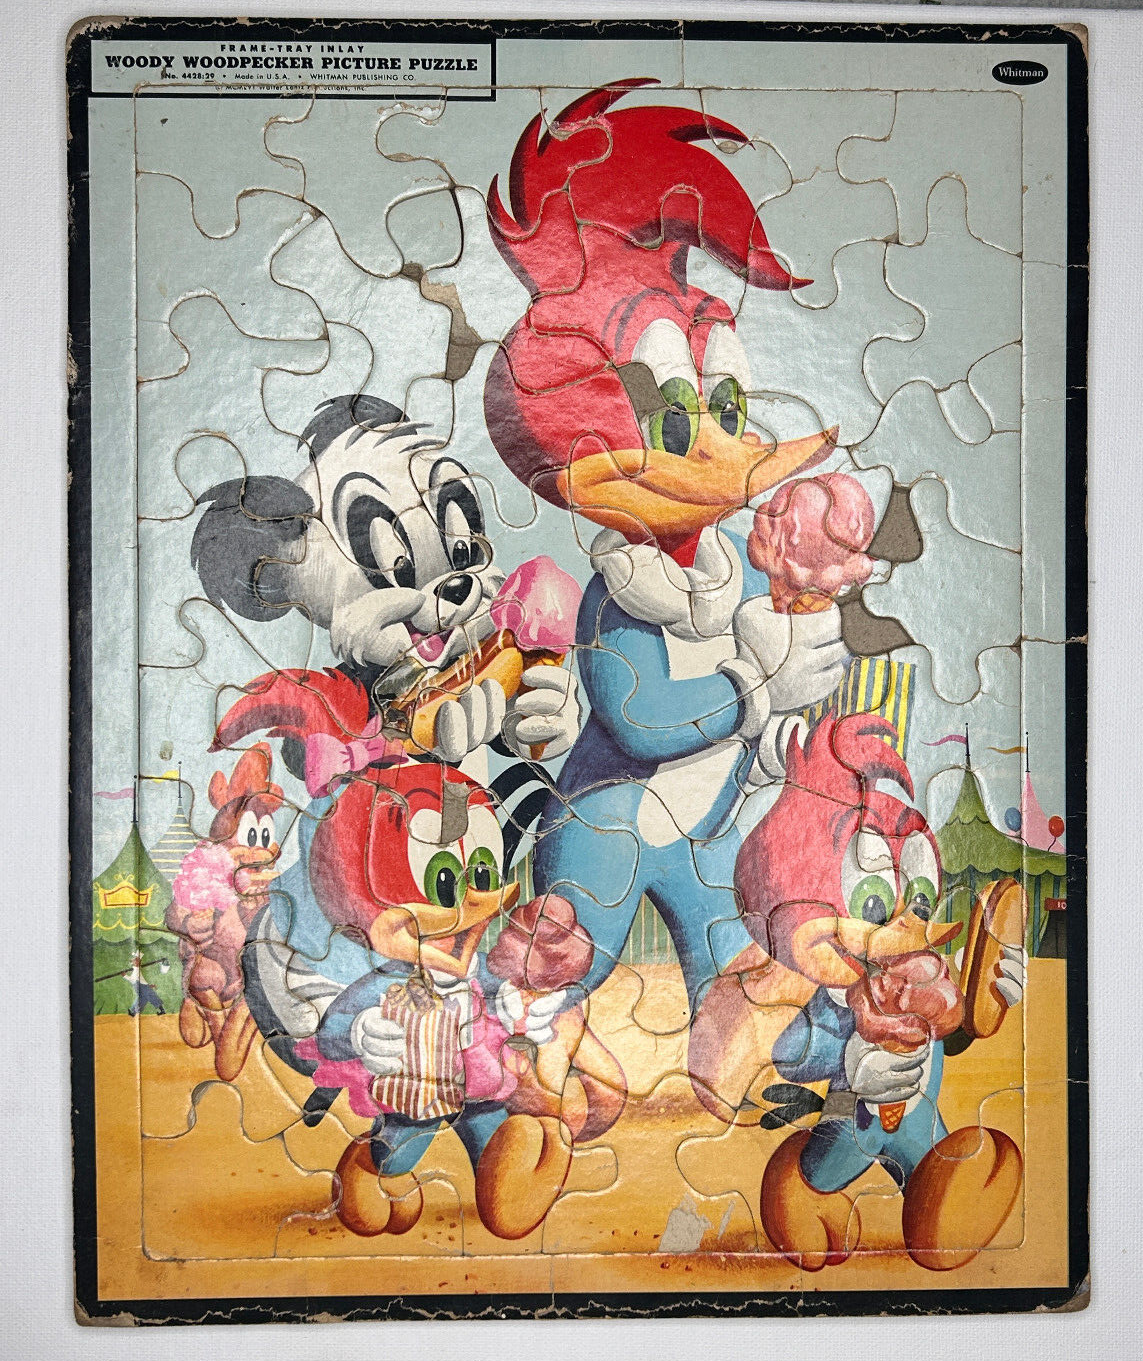 Vintage 1956 Whitman Woody The Woodpecker Damaged Tray Picture Puzzle 4428:29 - $4.95